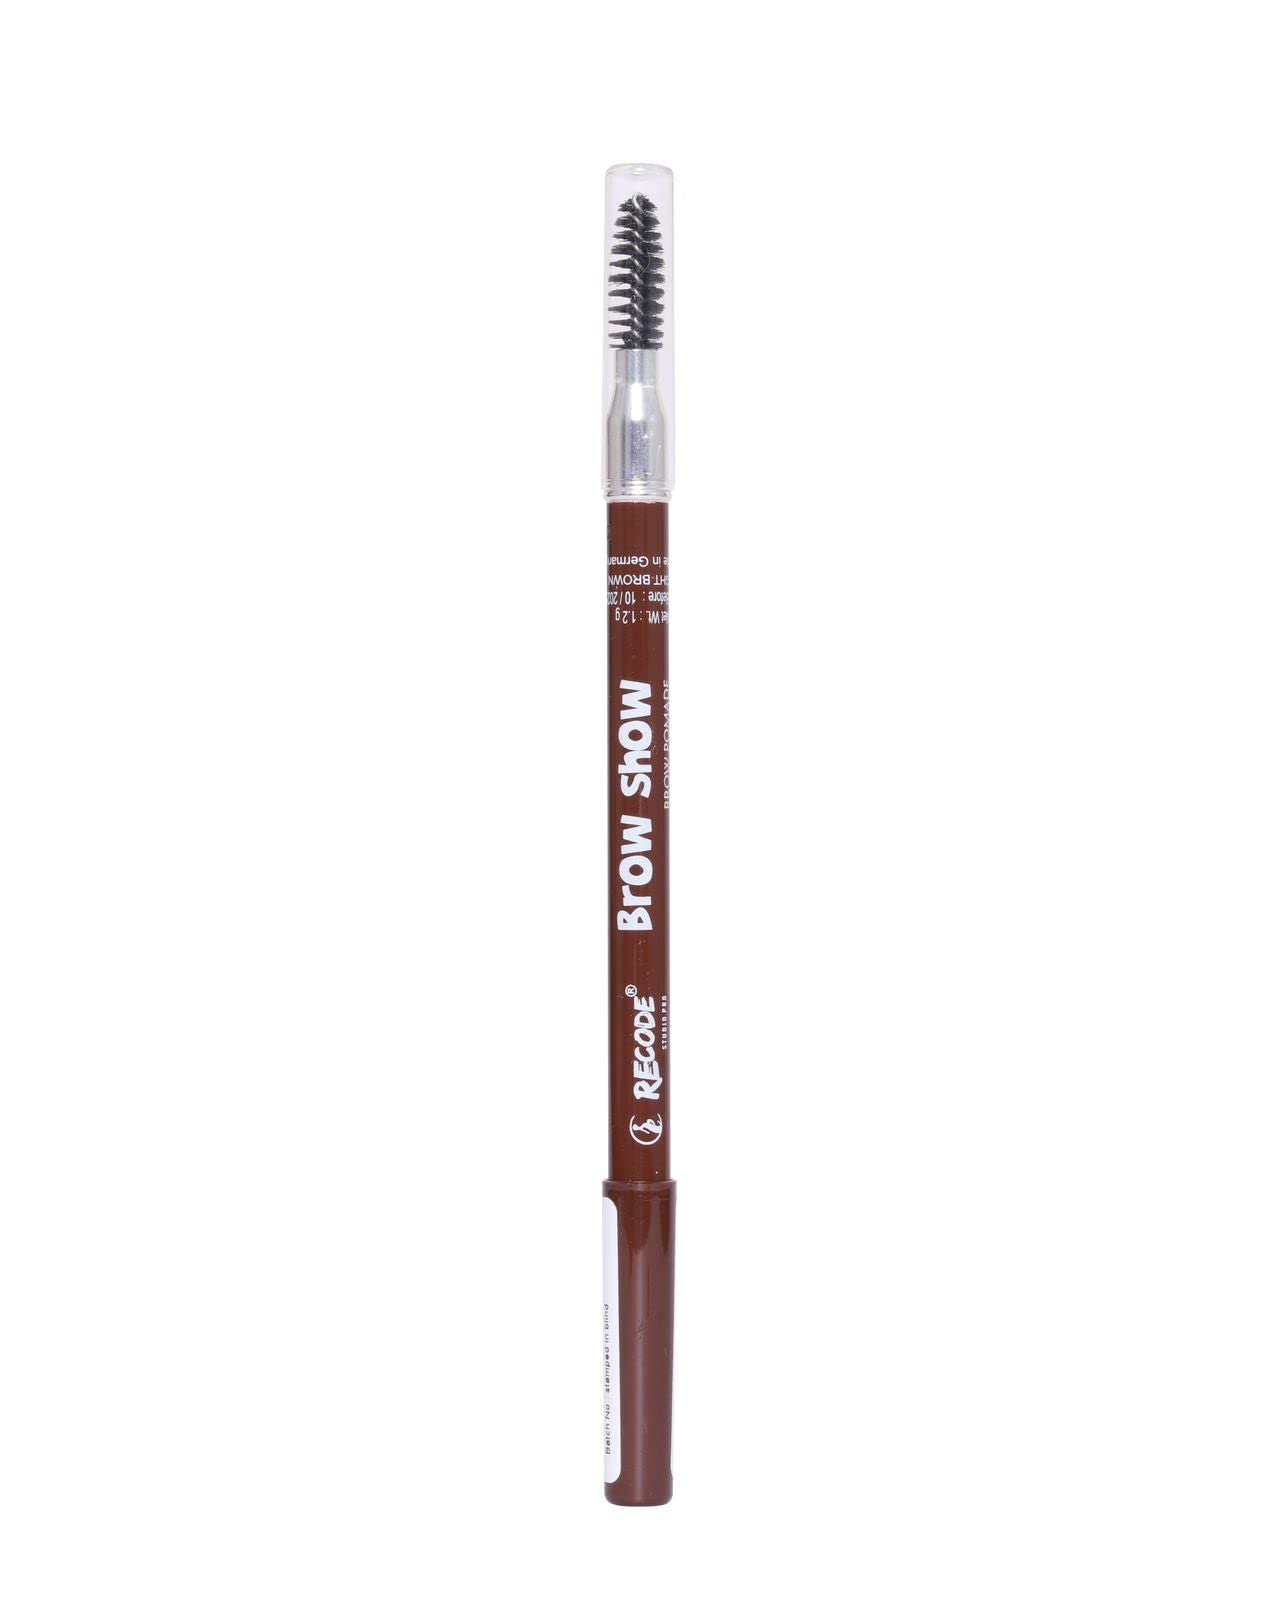 Recode Brow Definer Gel Gives Gliding Texture With Soft Application, Longlasting & Waterproof Formula, Perfect For Styling & Shaping Eyebrows, (Light Brown 1.2gm)